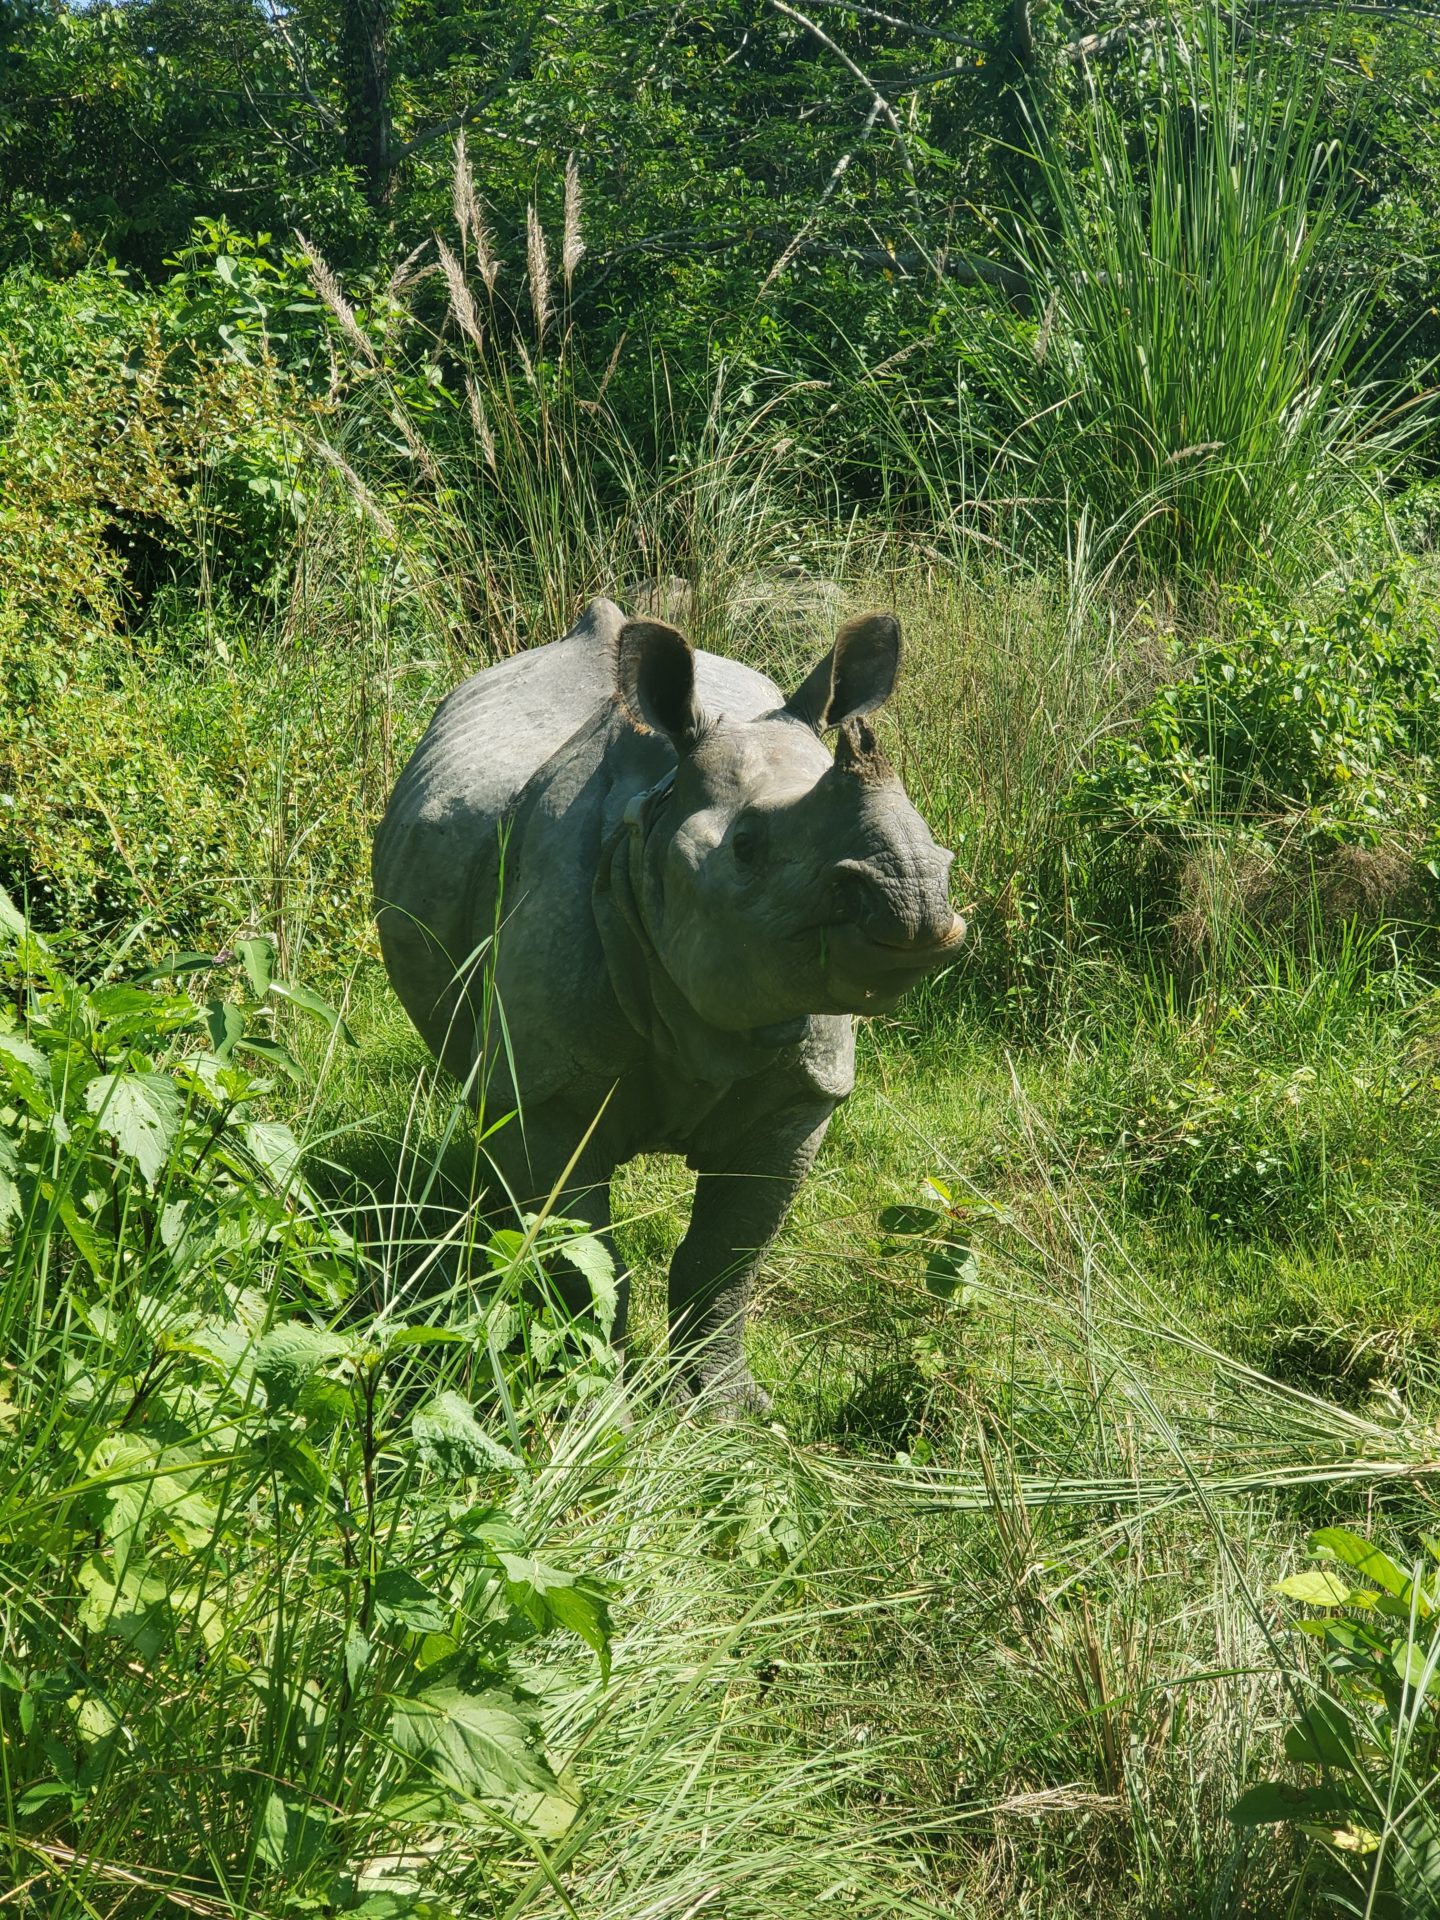 a rhinoceros standing in tall grass